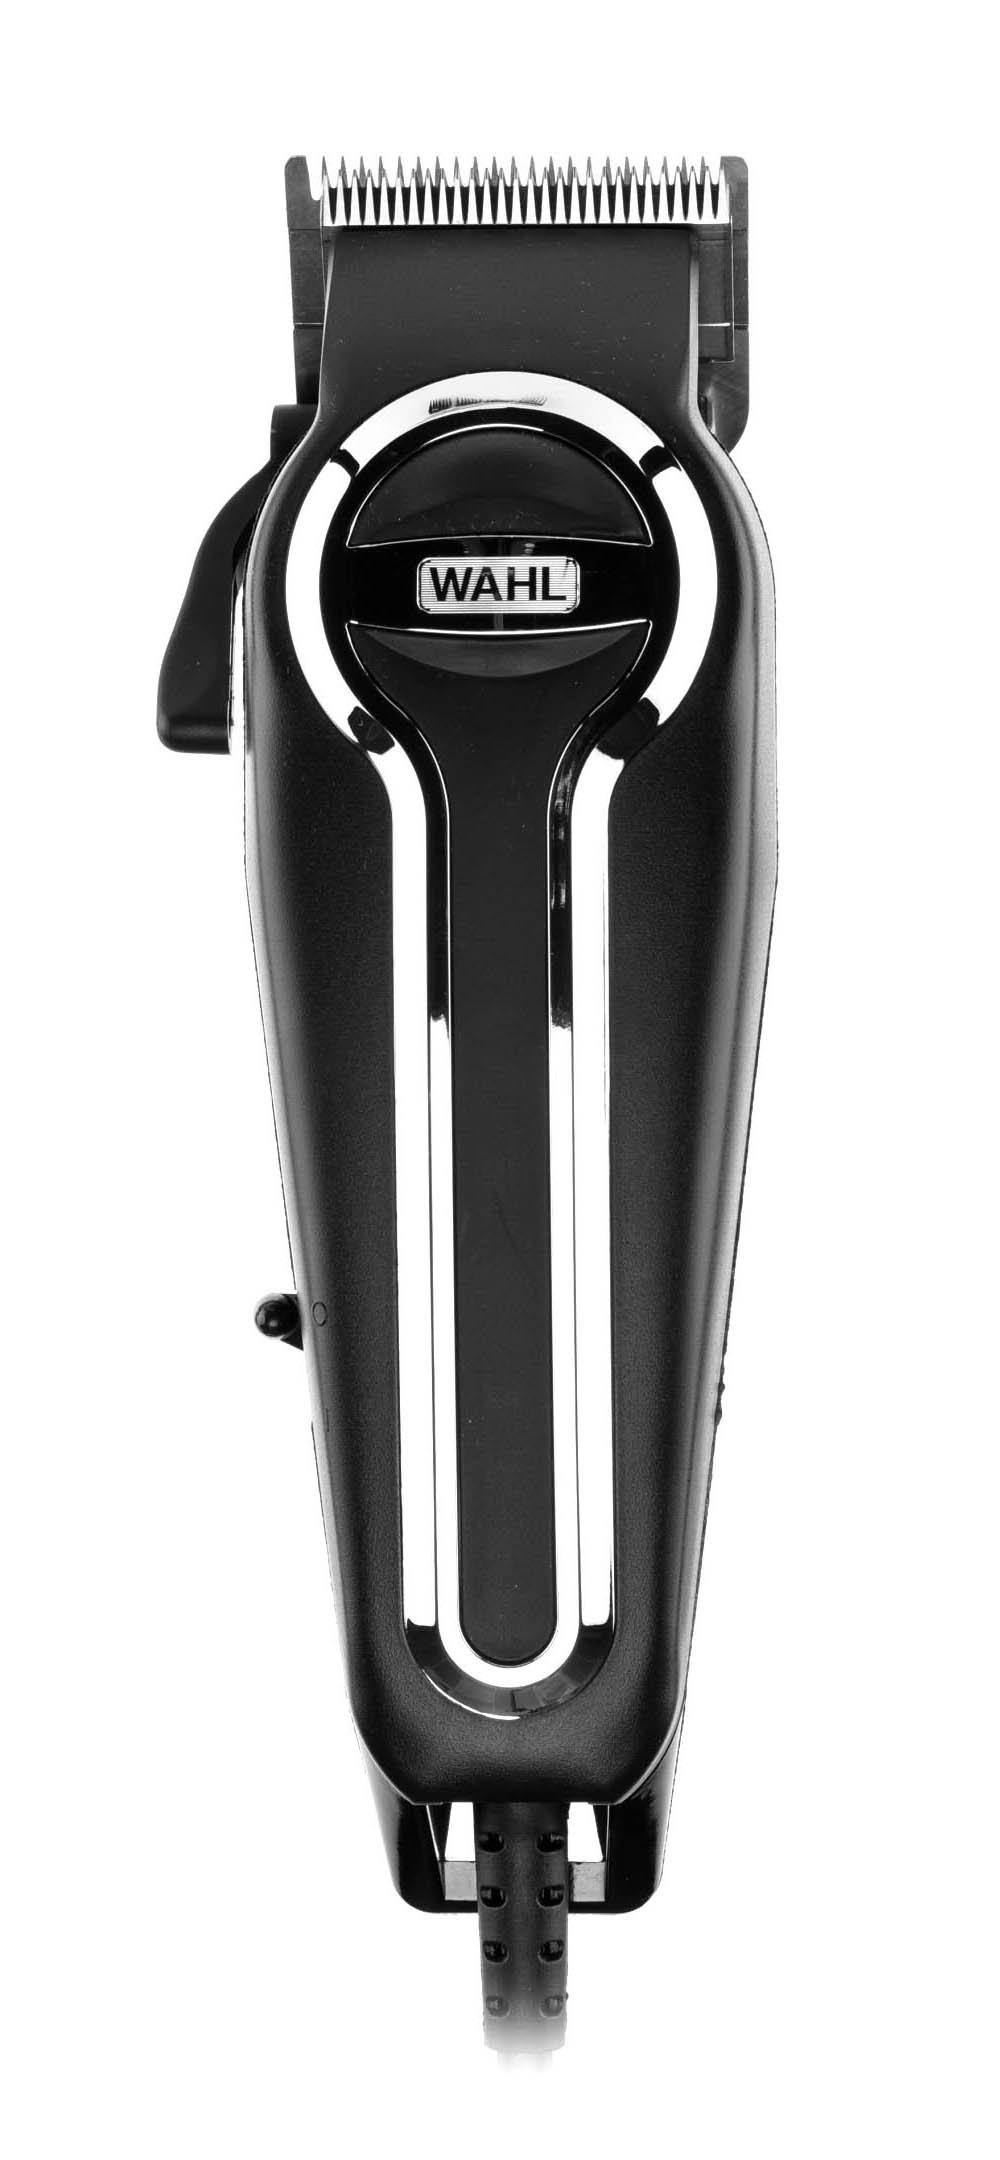 wahl hair clippers elite pro